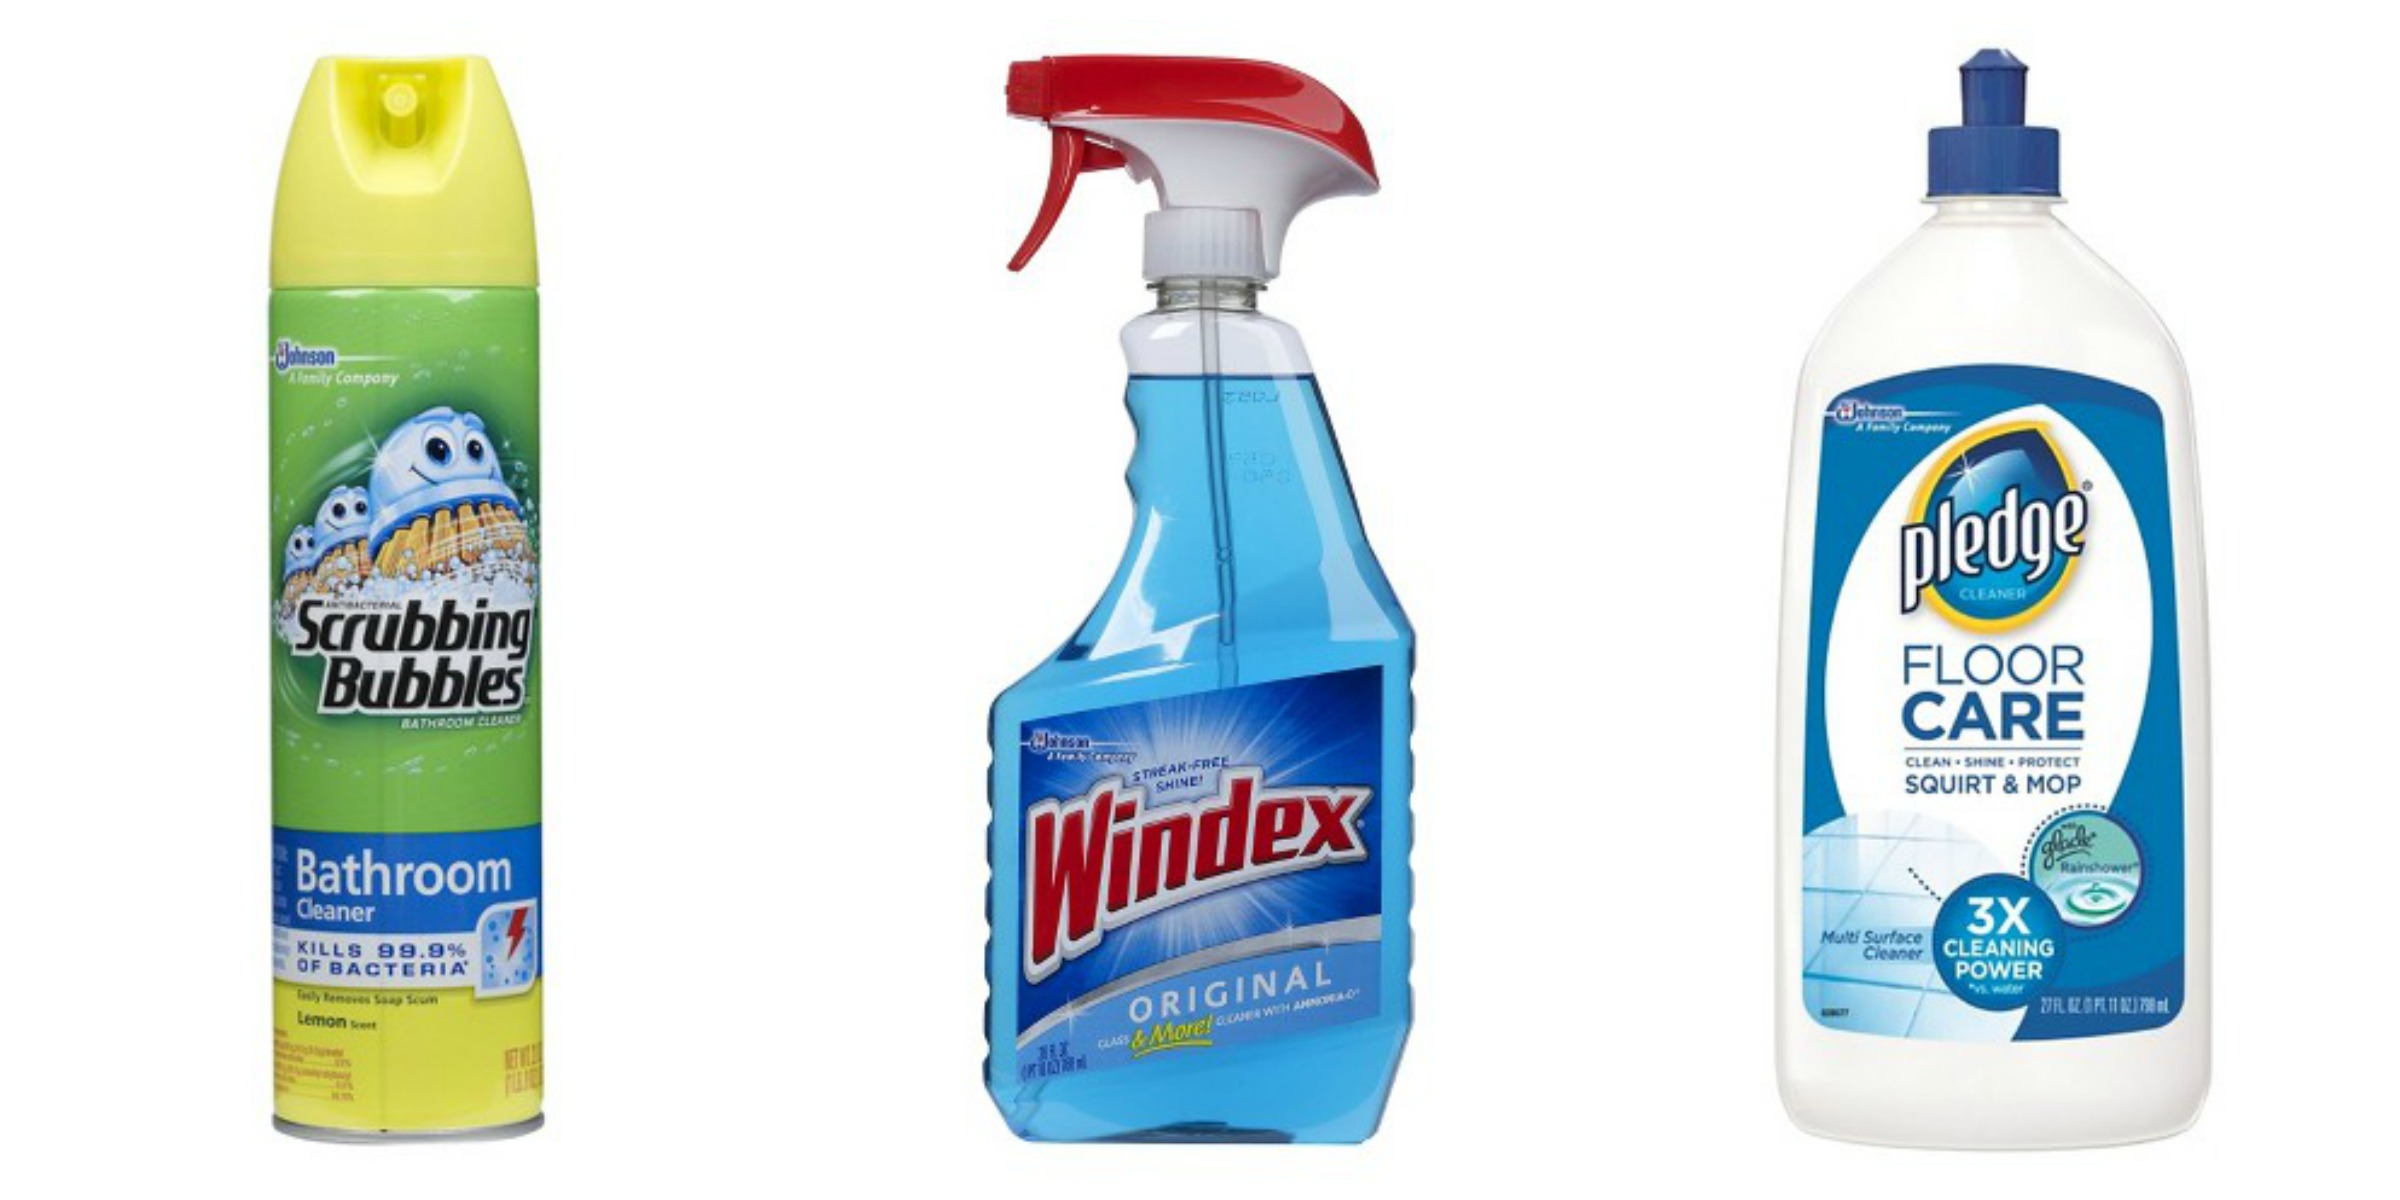 Meijer Scrubbing Bubbles Windex And Pledge Products Only 0 74